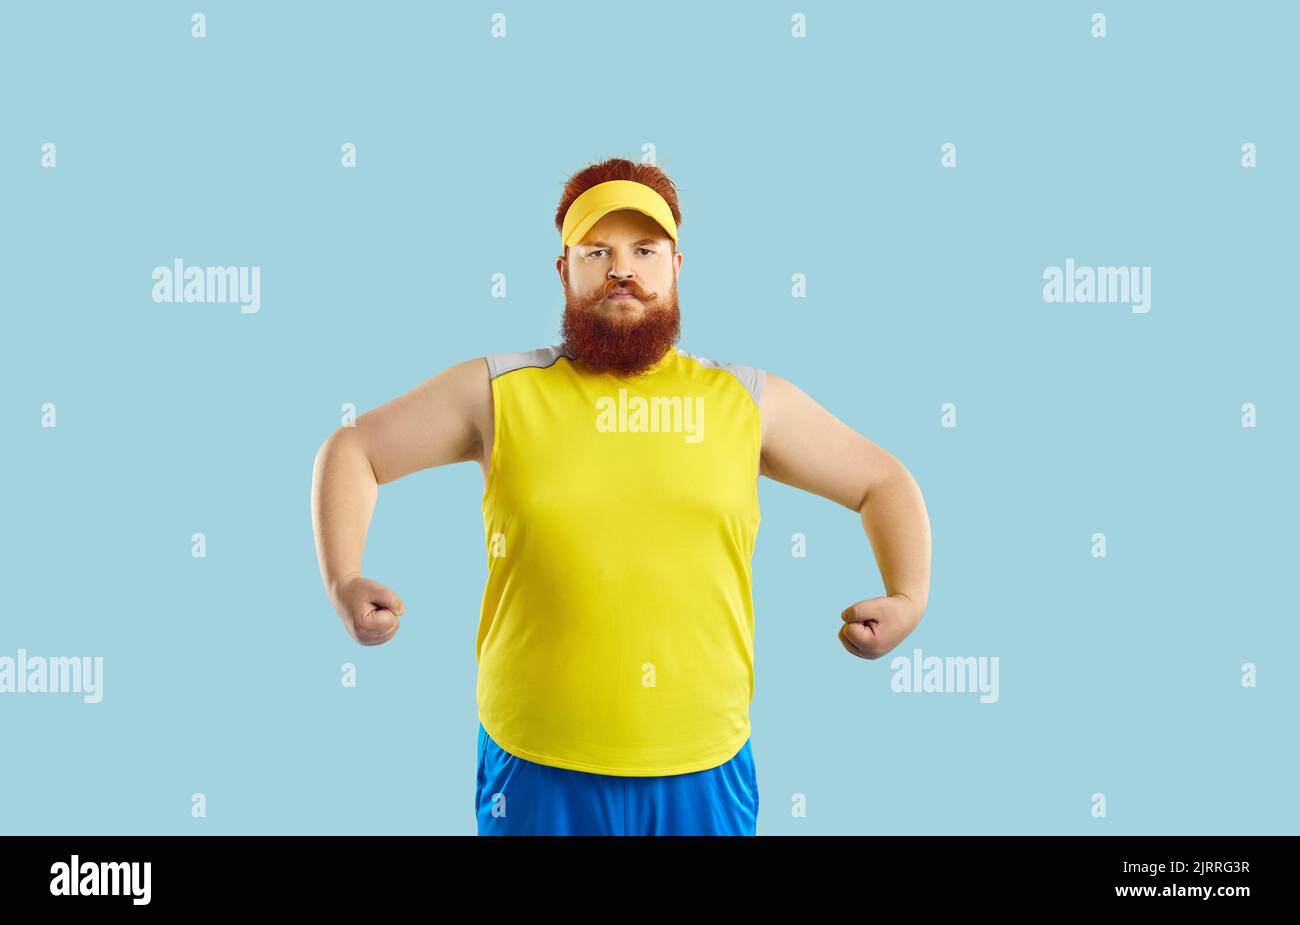 Funny serious fat man showing muscles after sports workout on light blue background. Stock Photo